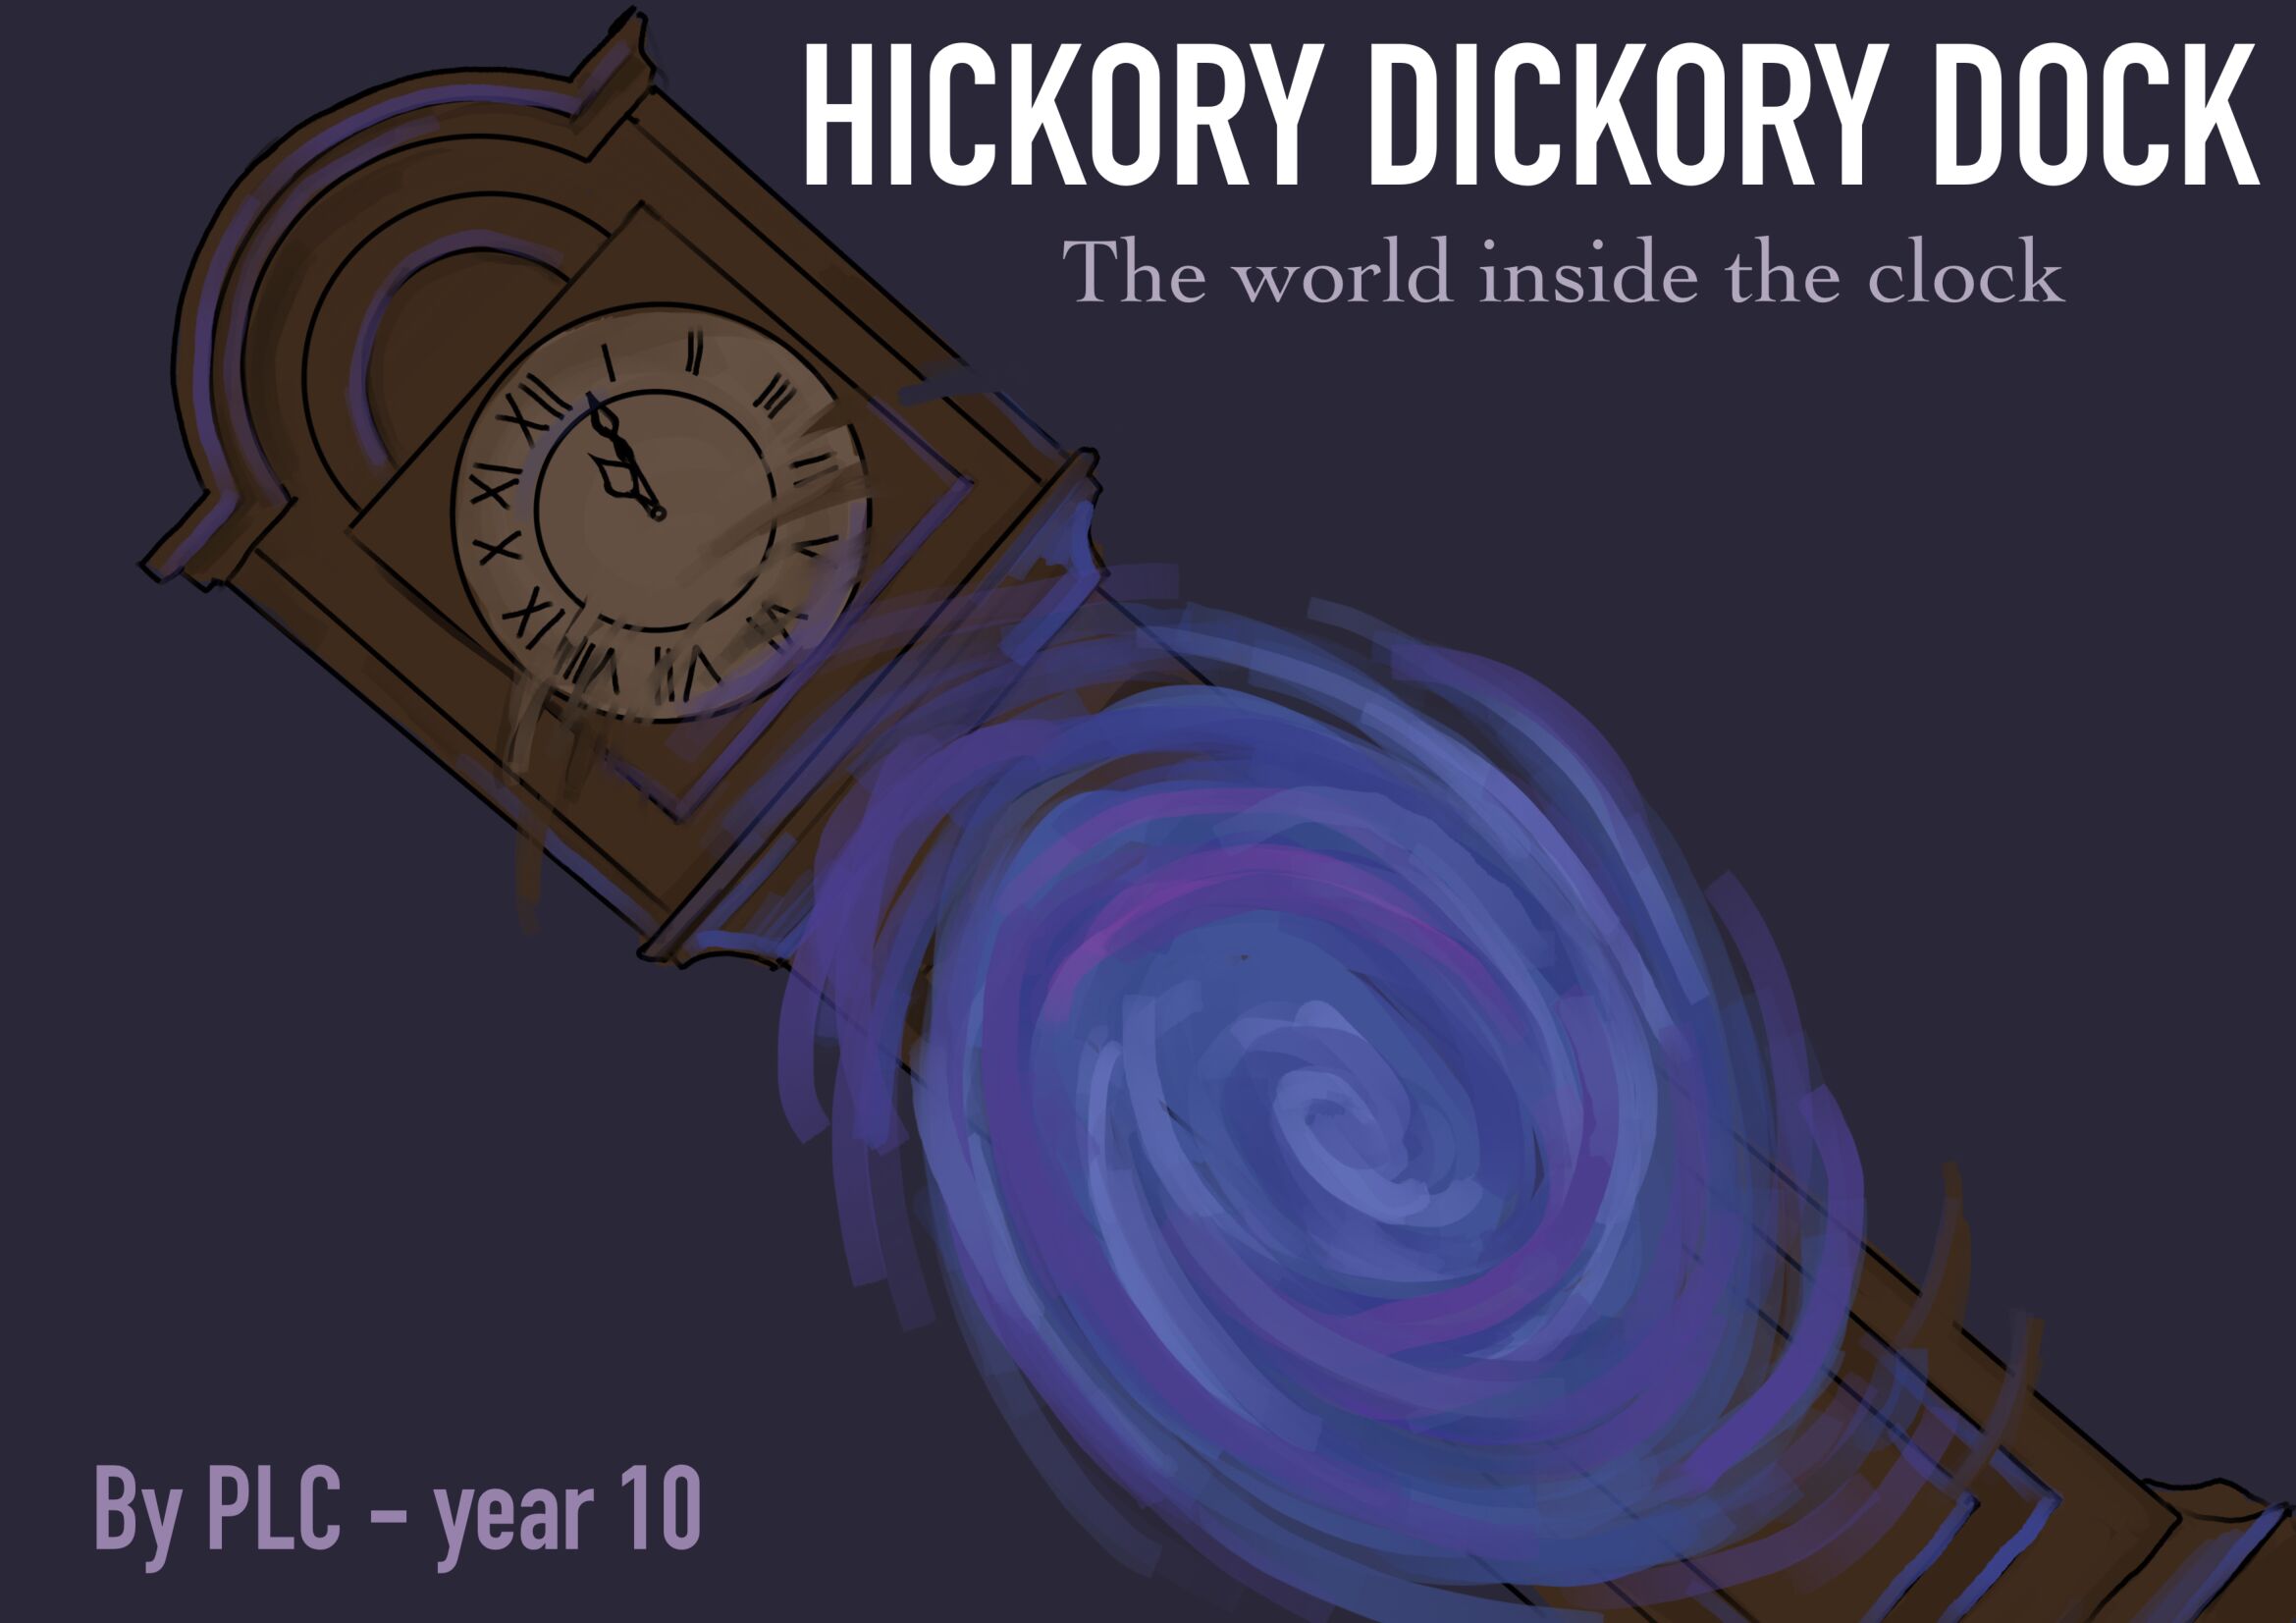 Hickory Dickory Dock - The Land Inside the Clock